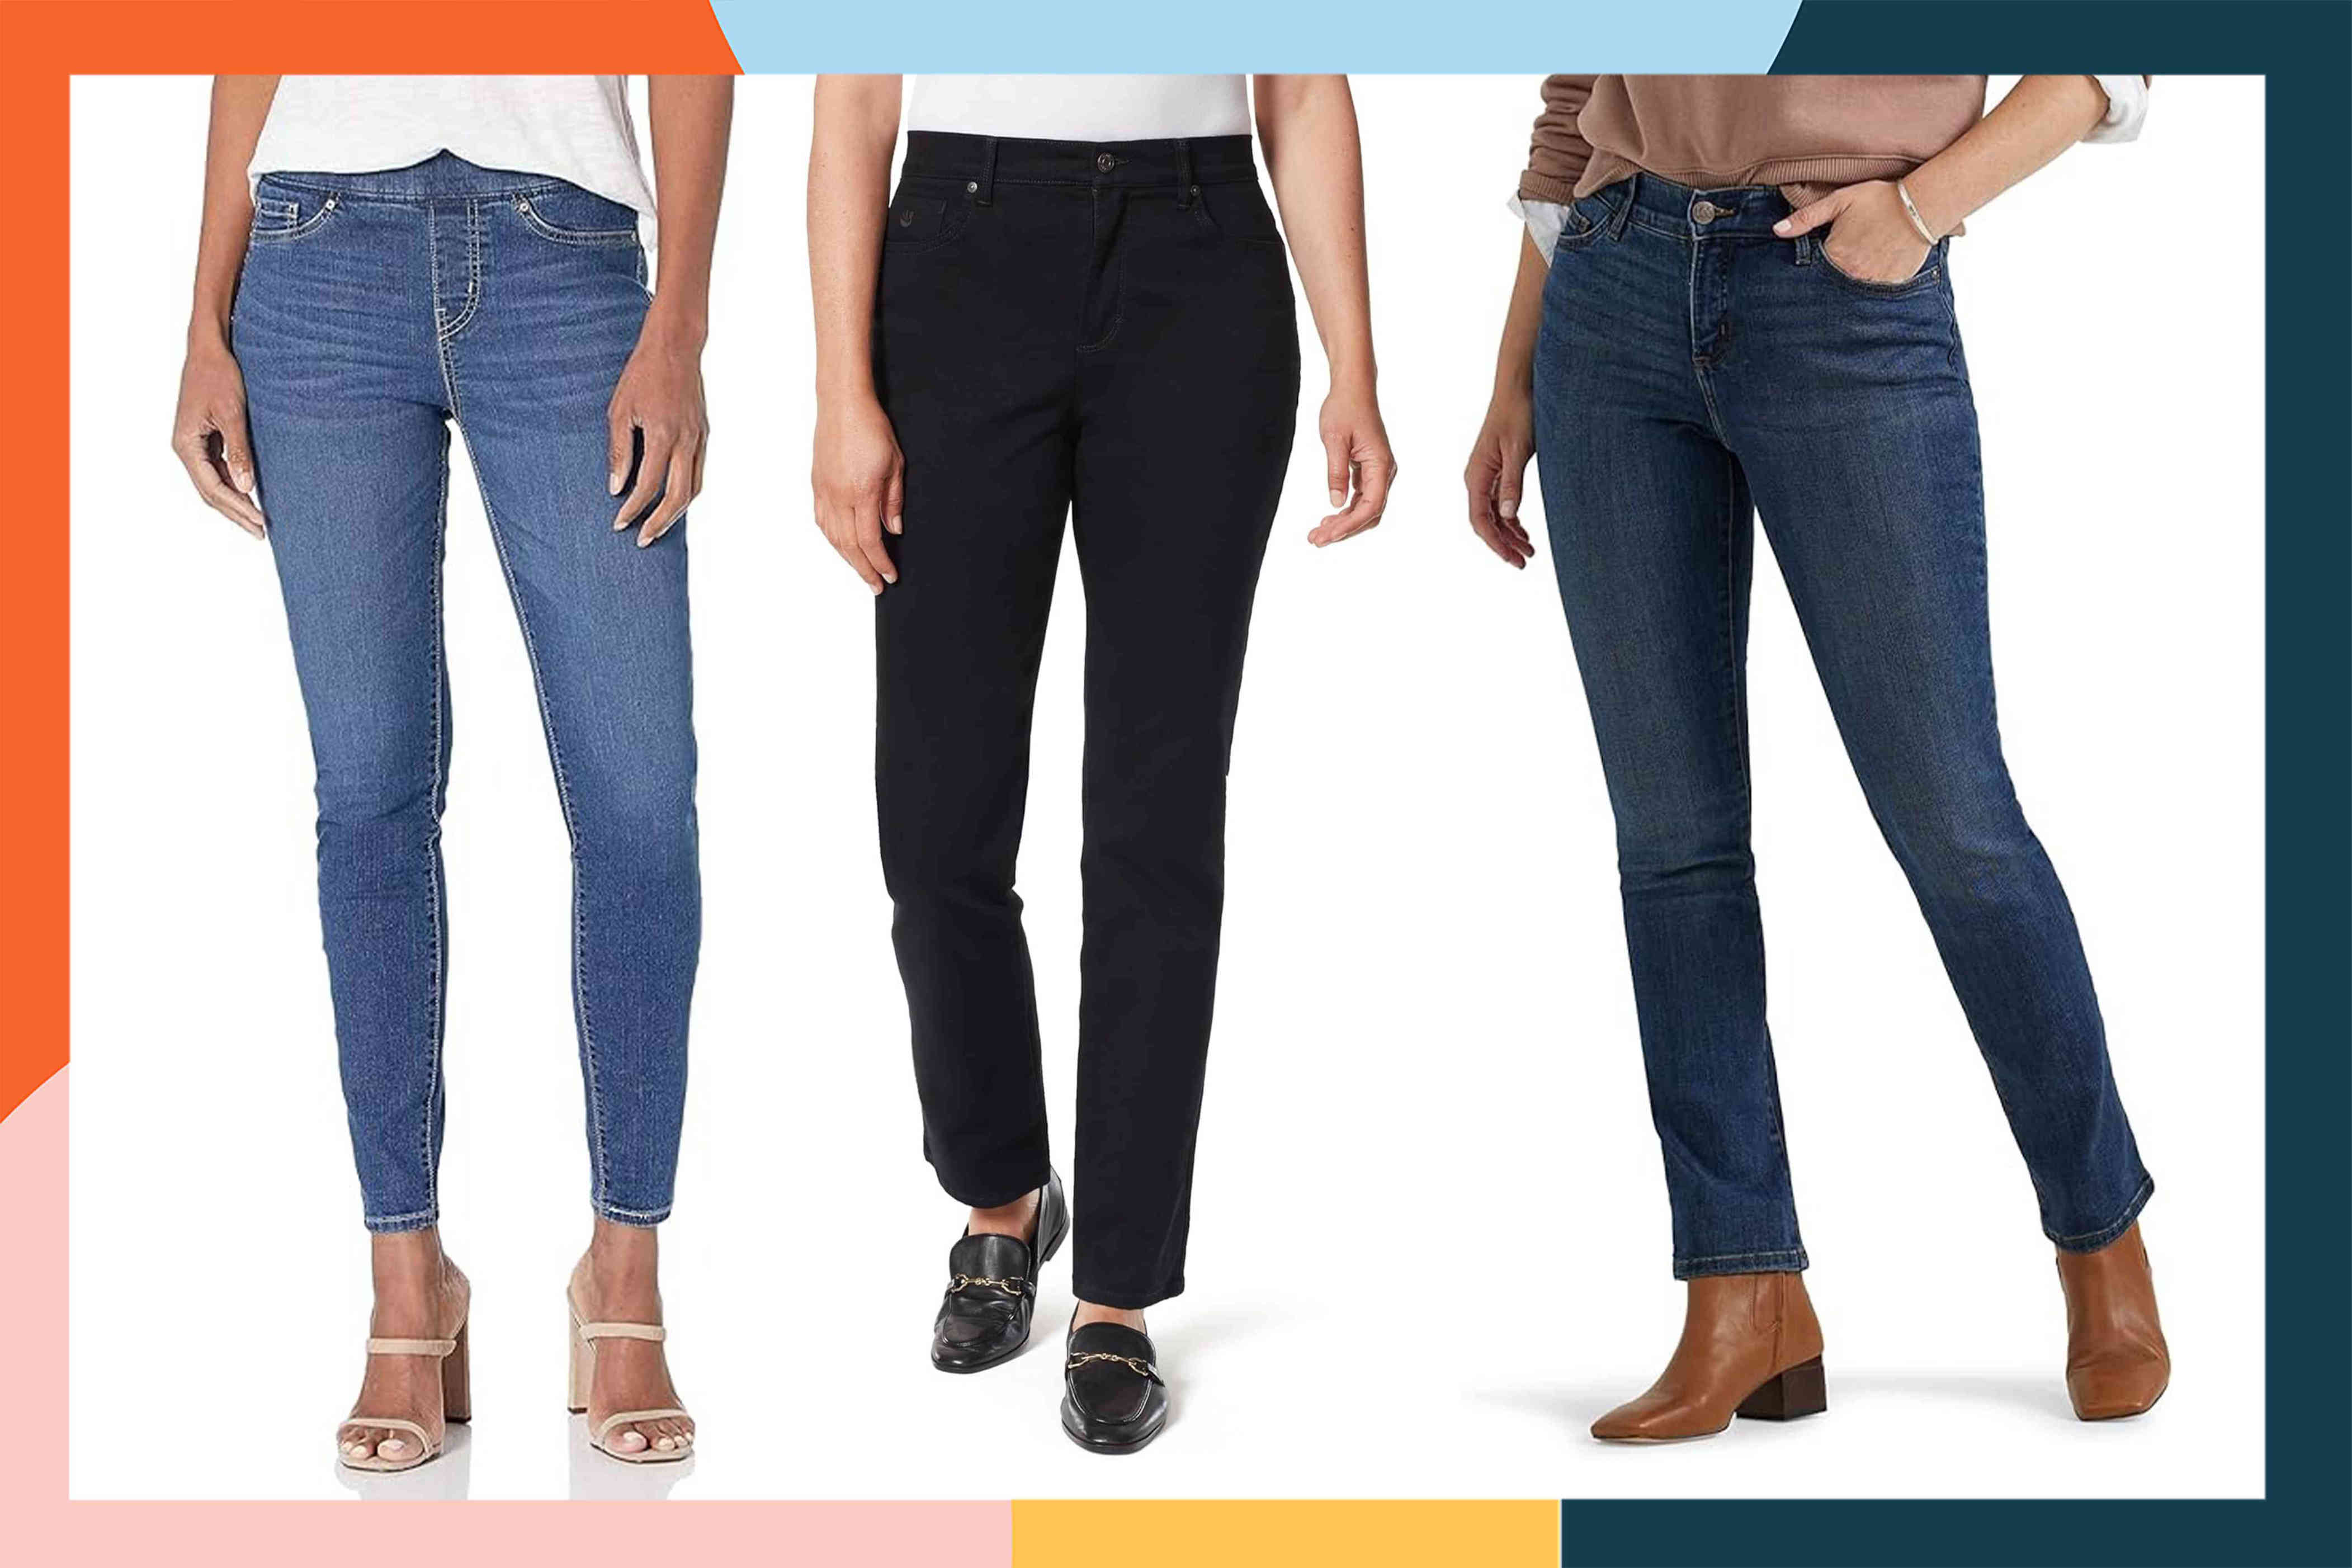 I'm 5'2, here's the 12 Best Types of Jeans for Short Women